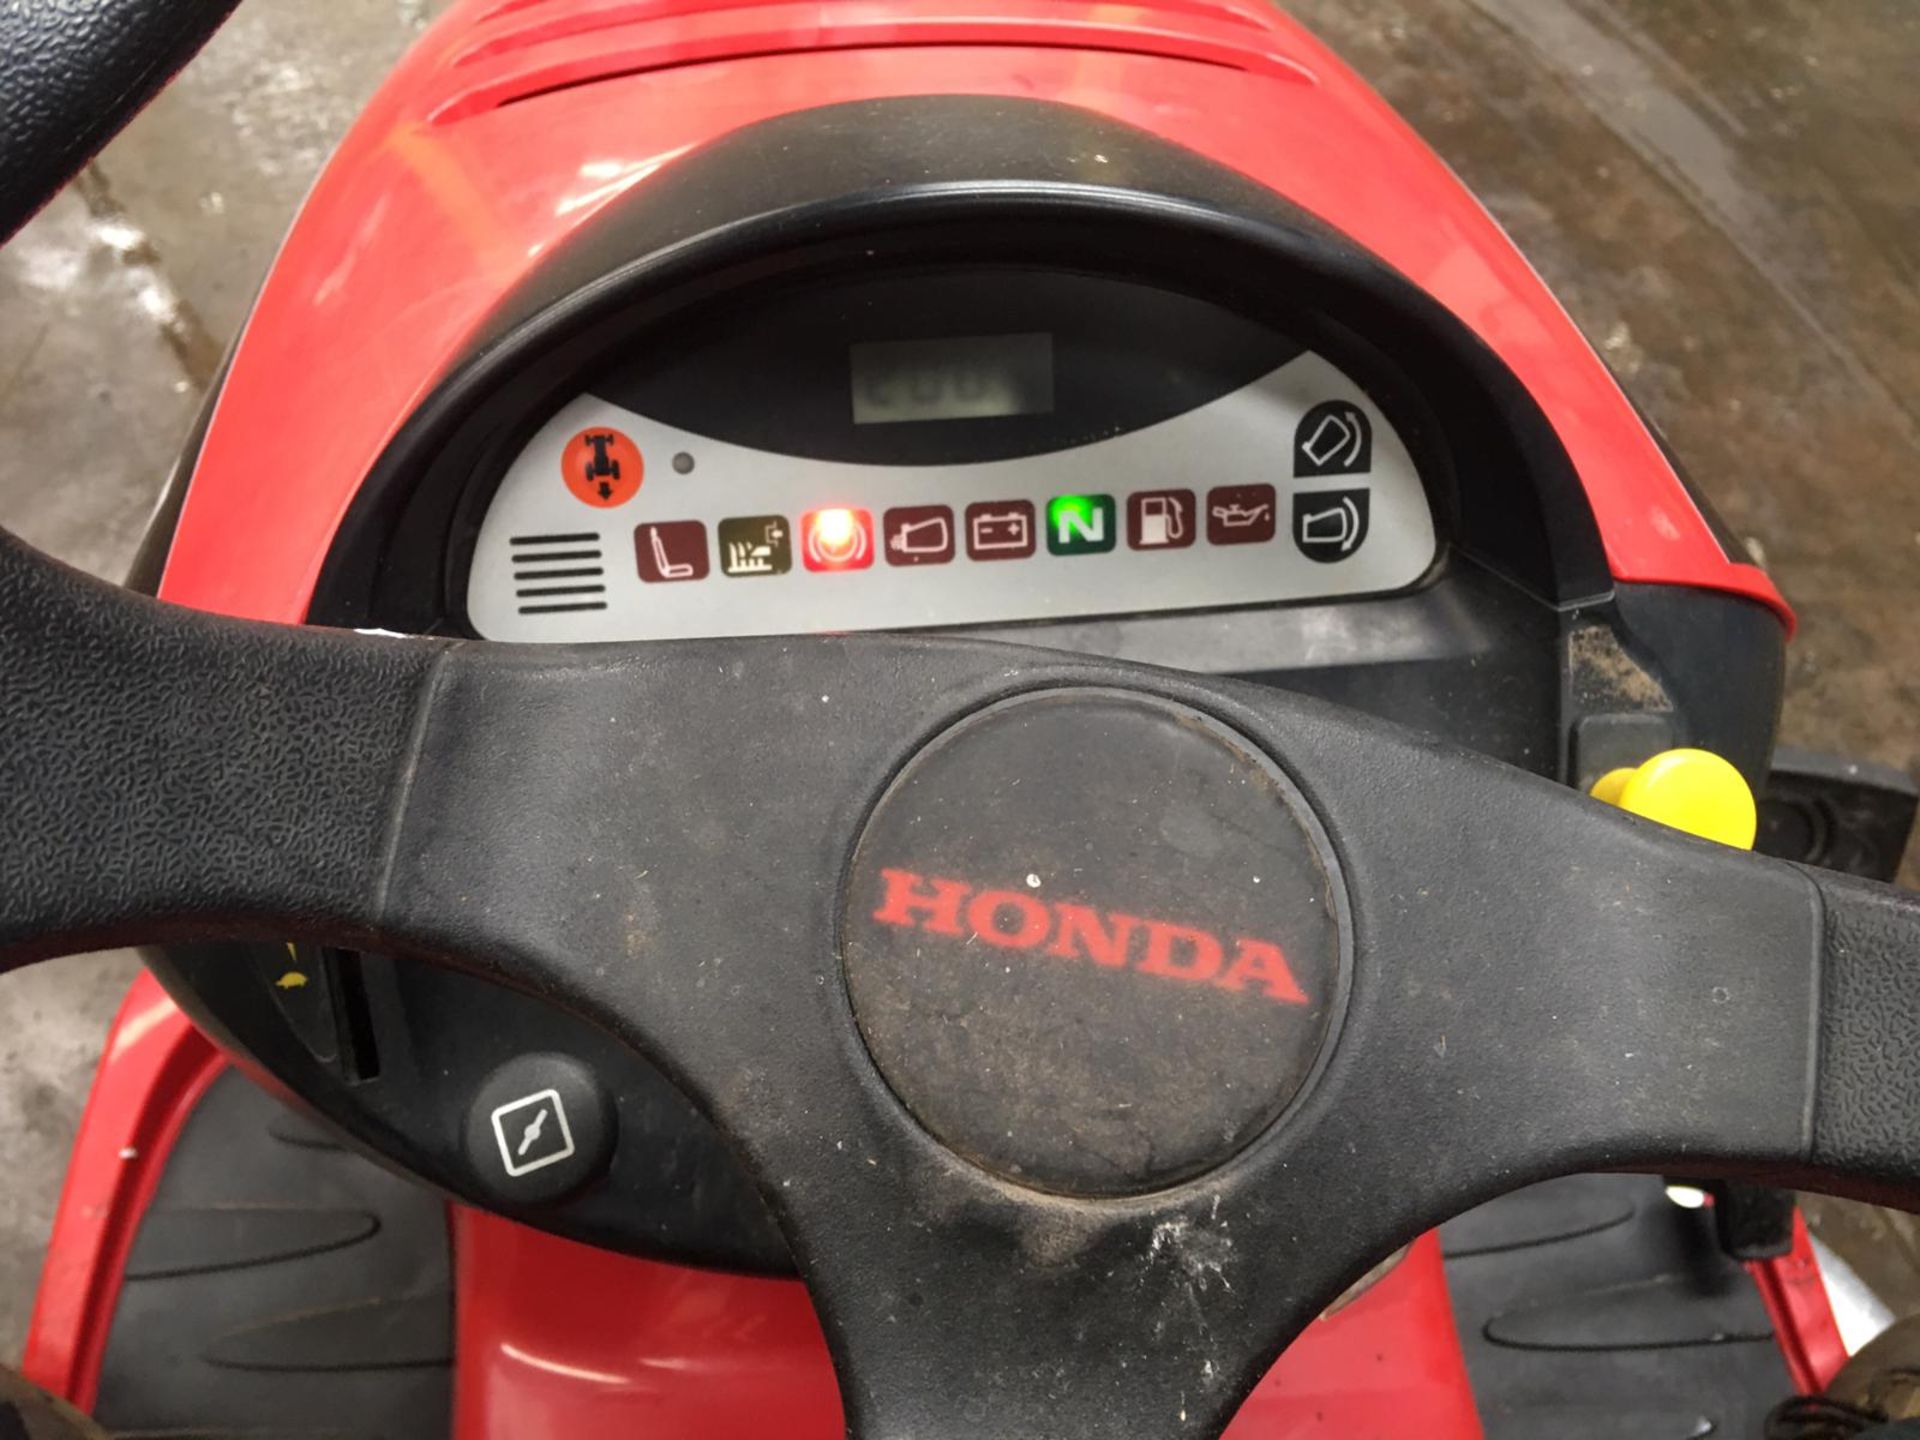 HONDA V-TWIN 2620 RIDE ON LAWN MOWER, HYDROSTATIC, STARTS AND RUNS, ELECTRIC TIP, ONLY 200.1 HOURS - Image 10 of 13